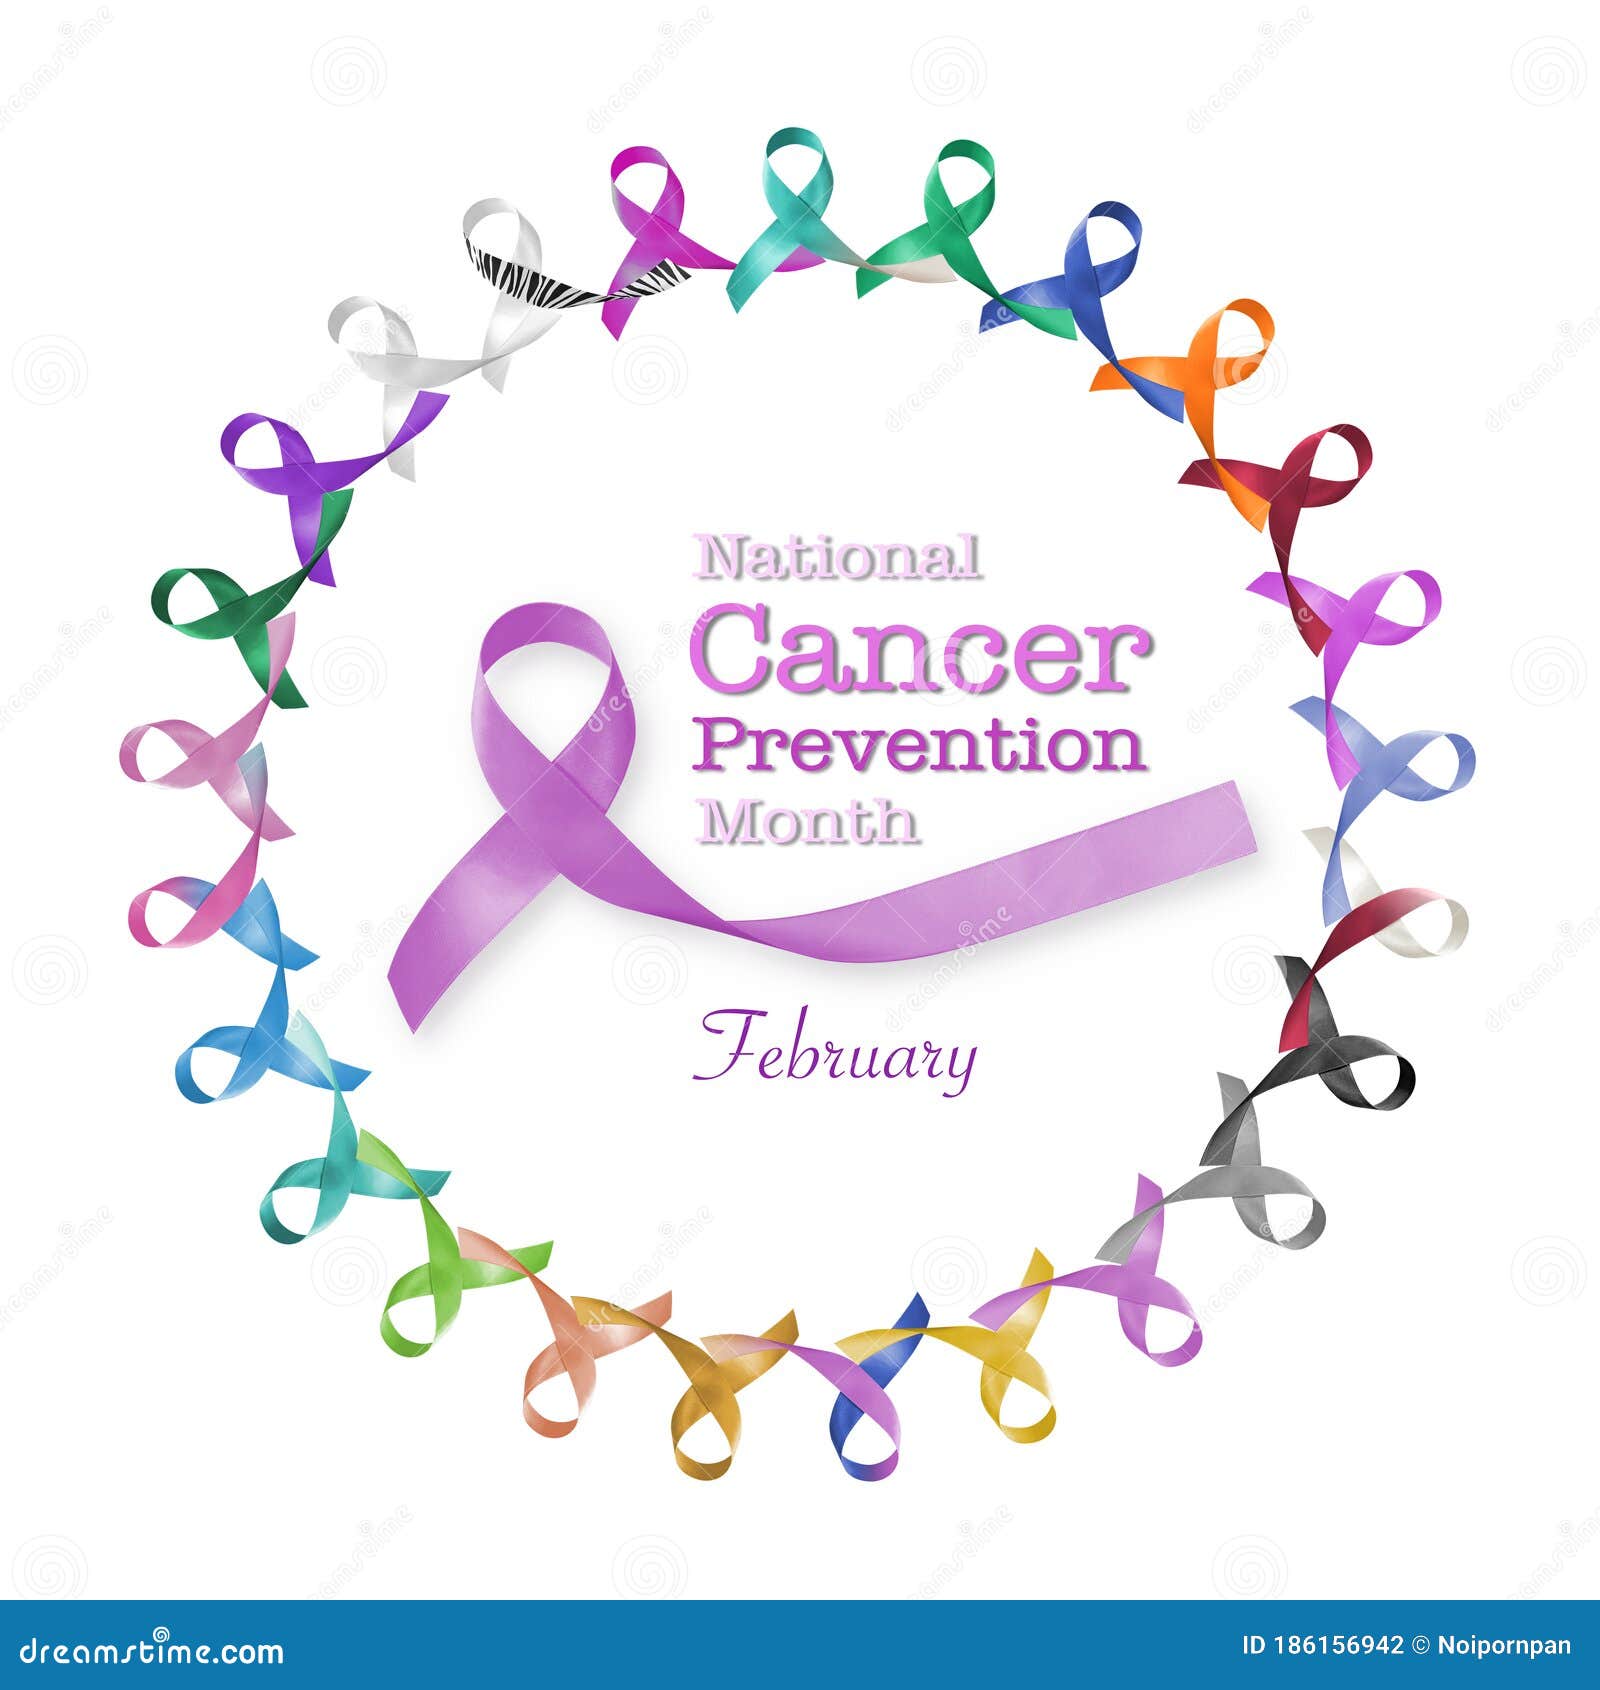 national cancer prevention month, february, with multi-color and lavender purple ribbons for raising awareness of all kind tumors